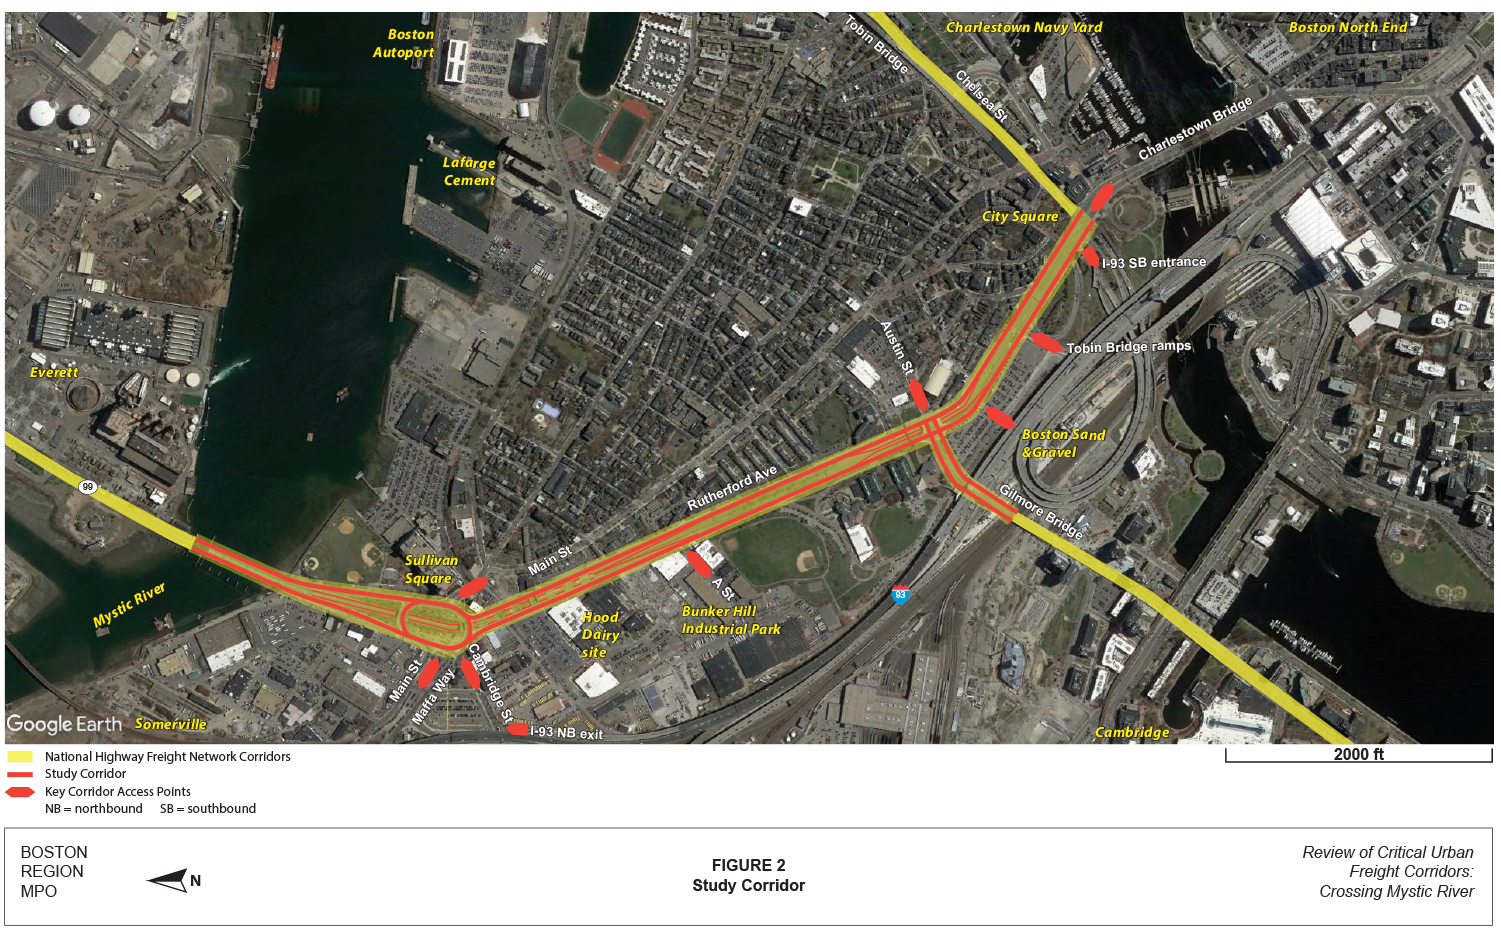 FIGURE 2. Study Corridor
This image shows the study corridor superimposed on an aerial photo of Charlestown. Streets and highway ramps mentioned in the text are labeled, as are several important locations including Sullivan and City Squares, Boston Autoport, Bunker Hill Industrial Park, and Boston Sand and Gravel.
